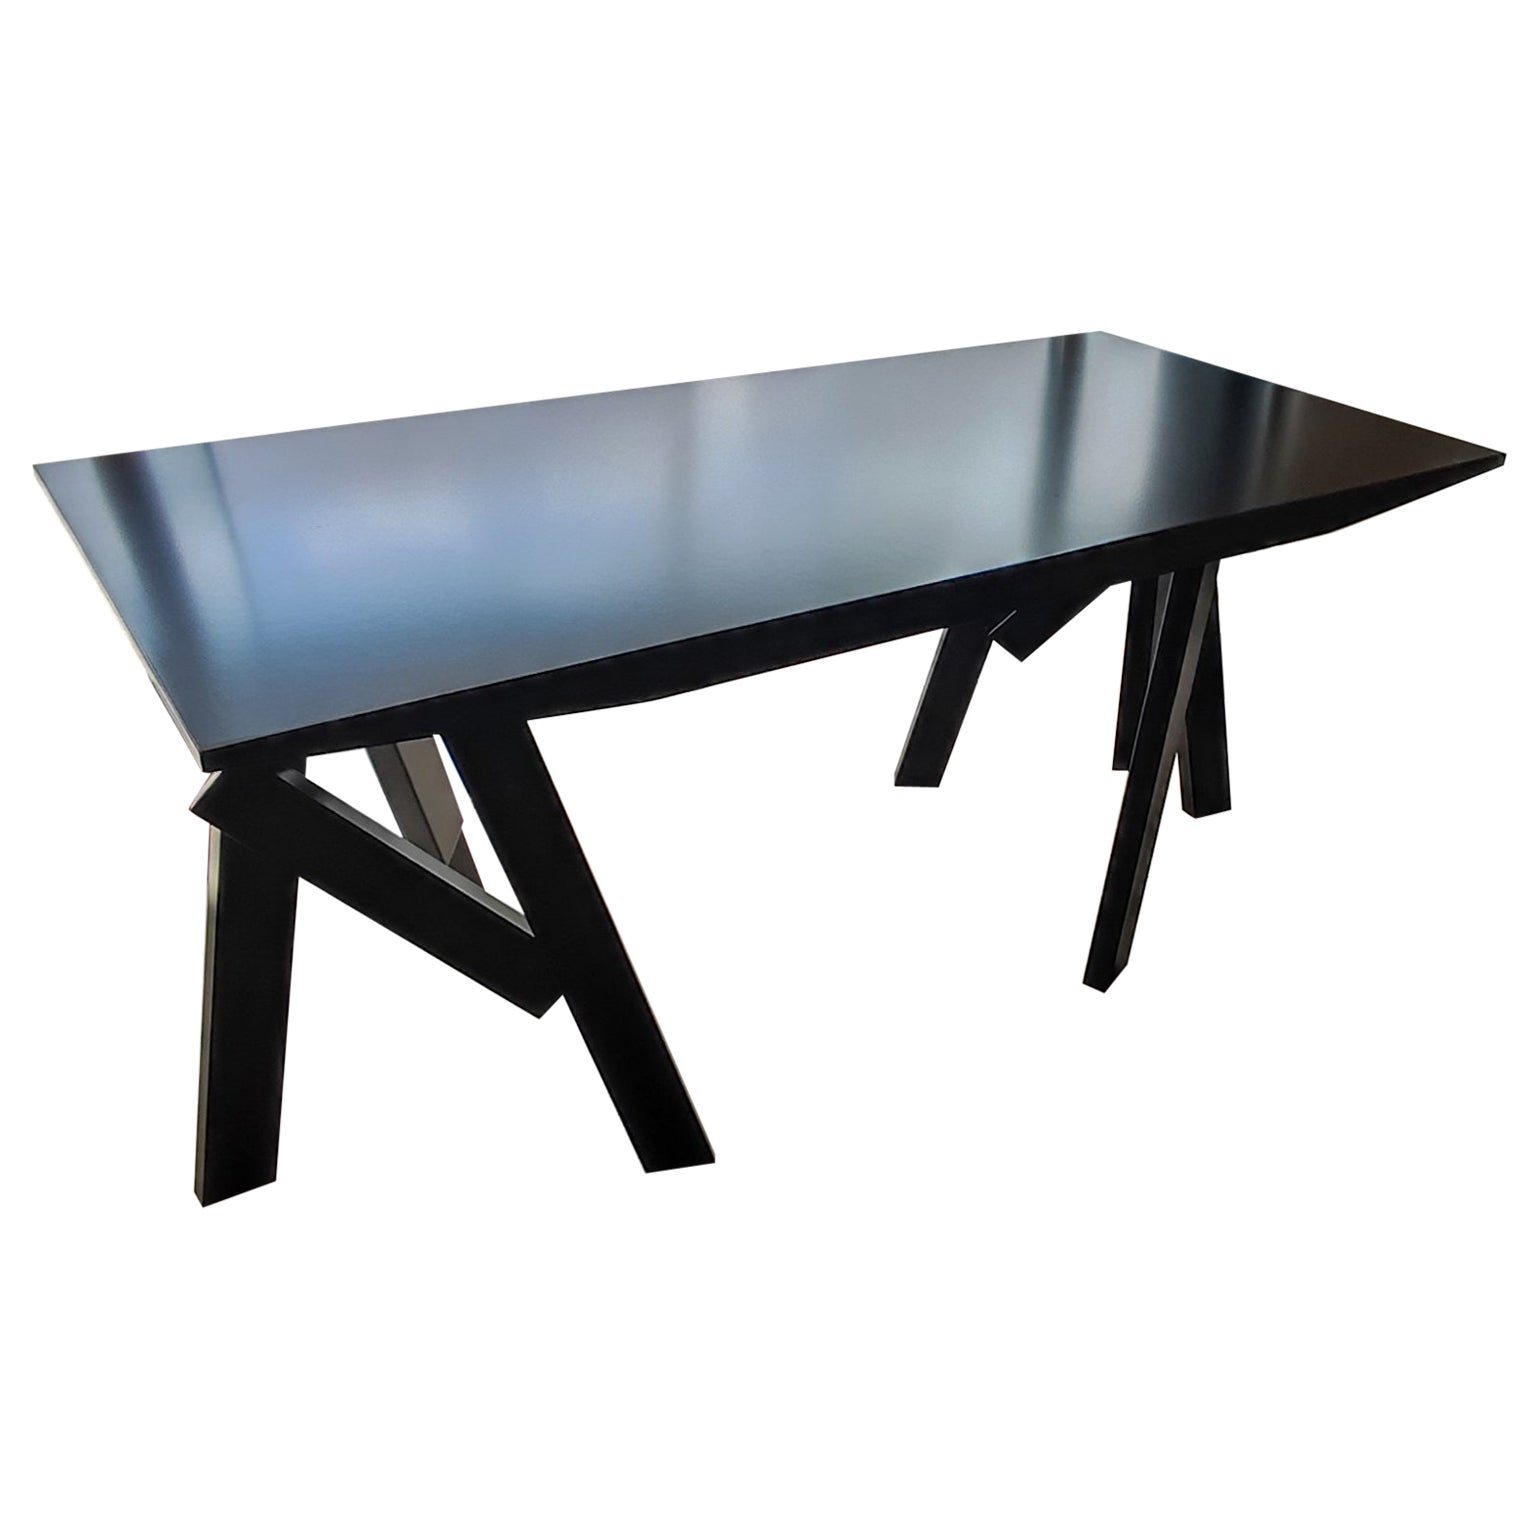 Table by Stephane Ducatteau, France, Small Edition